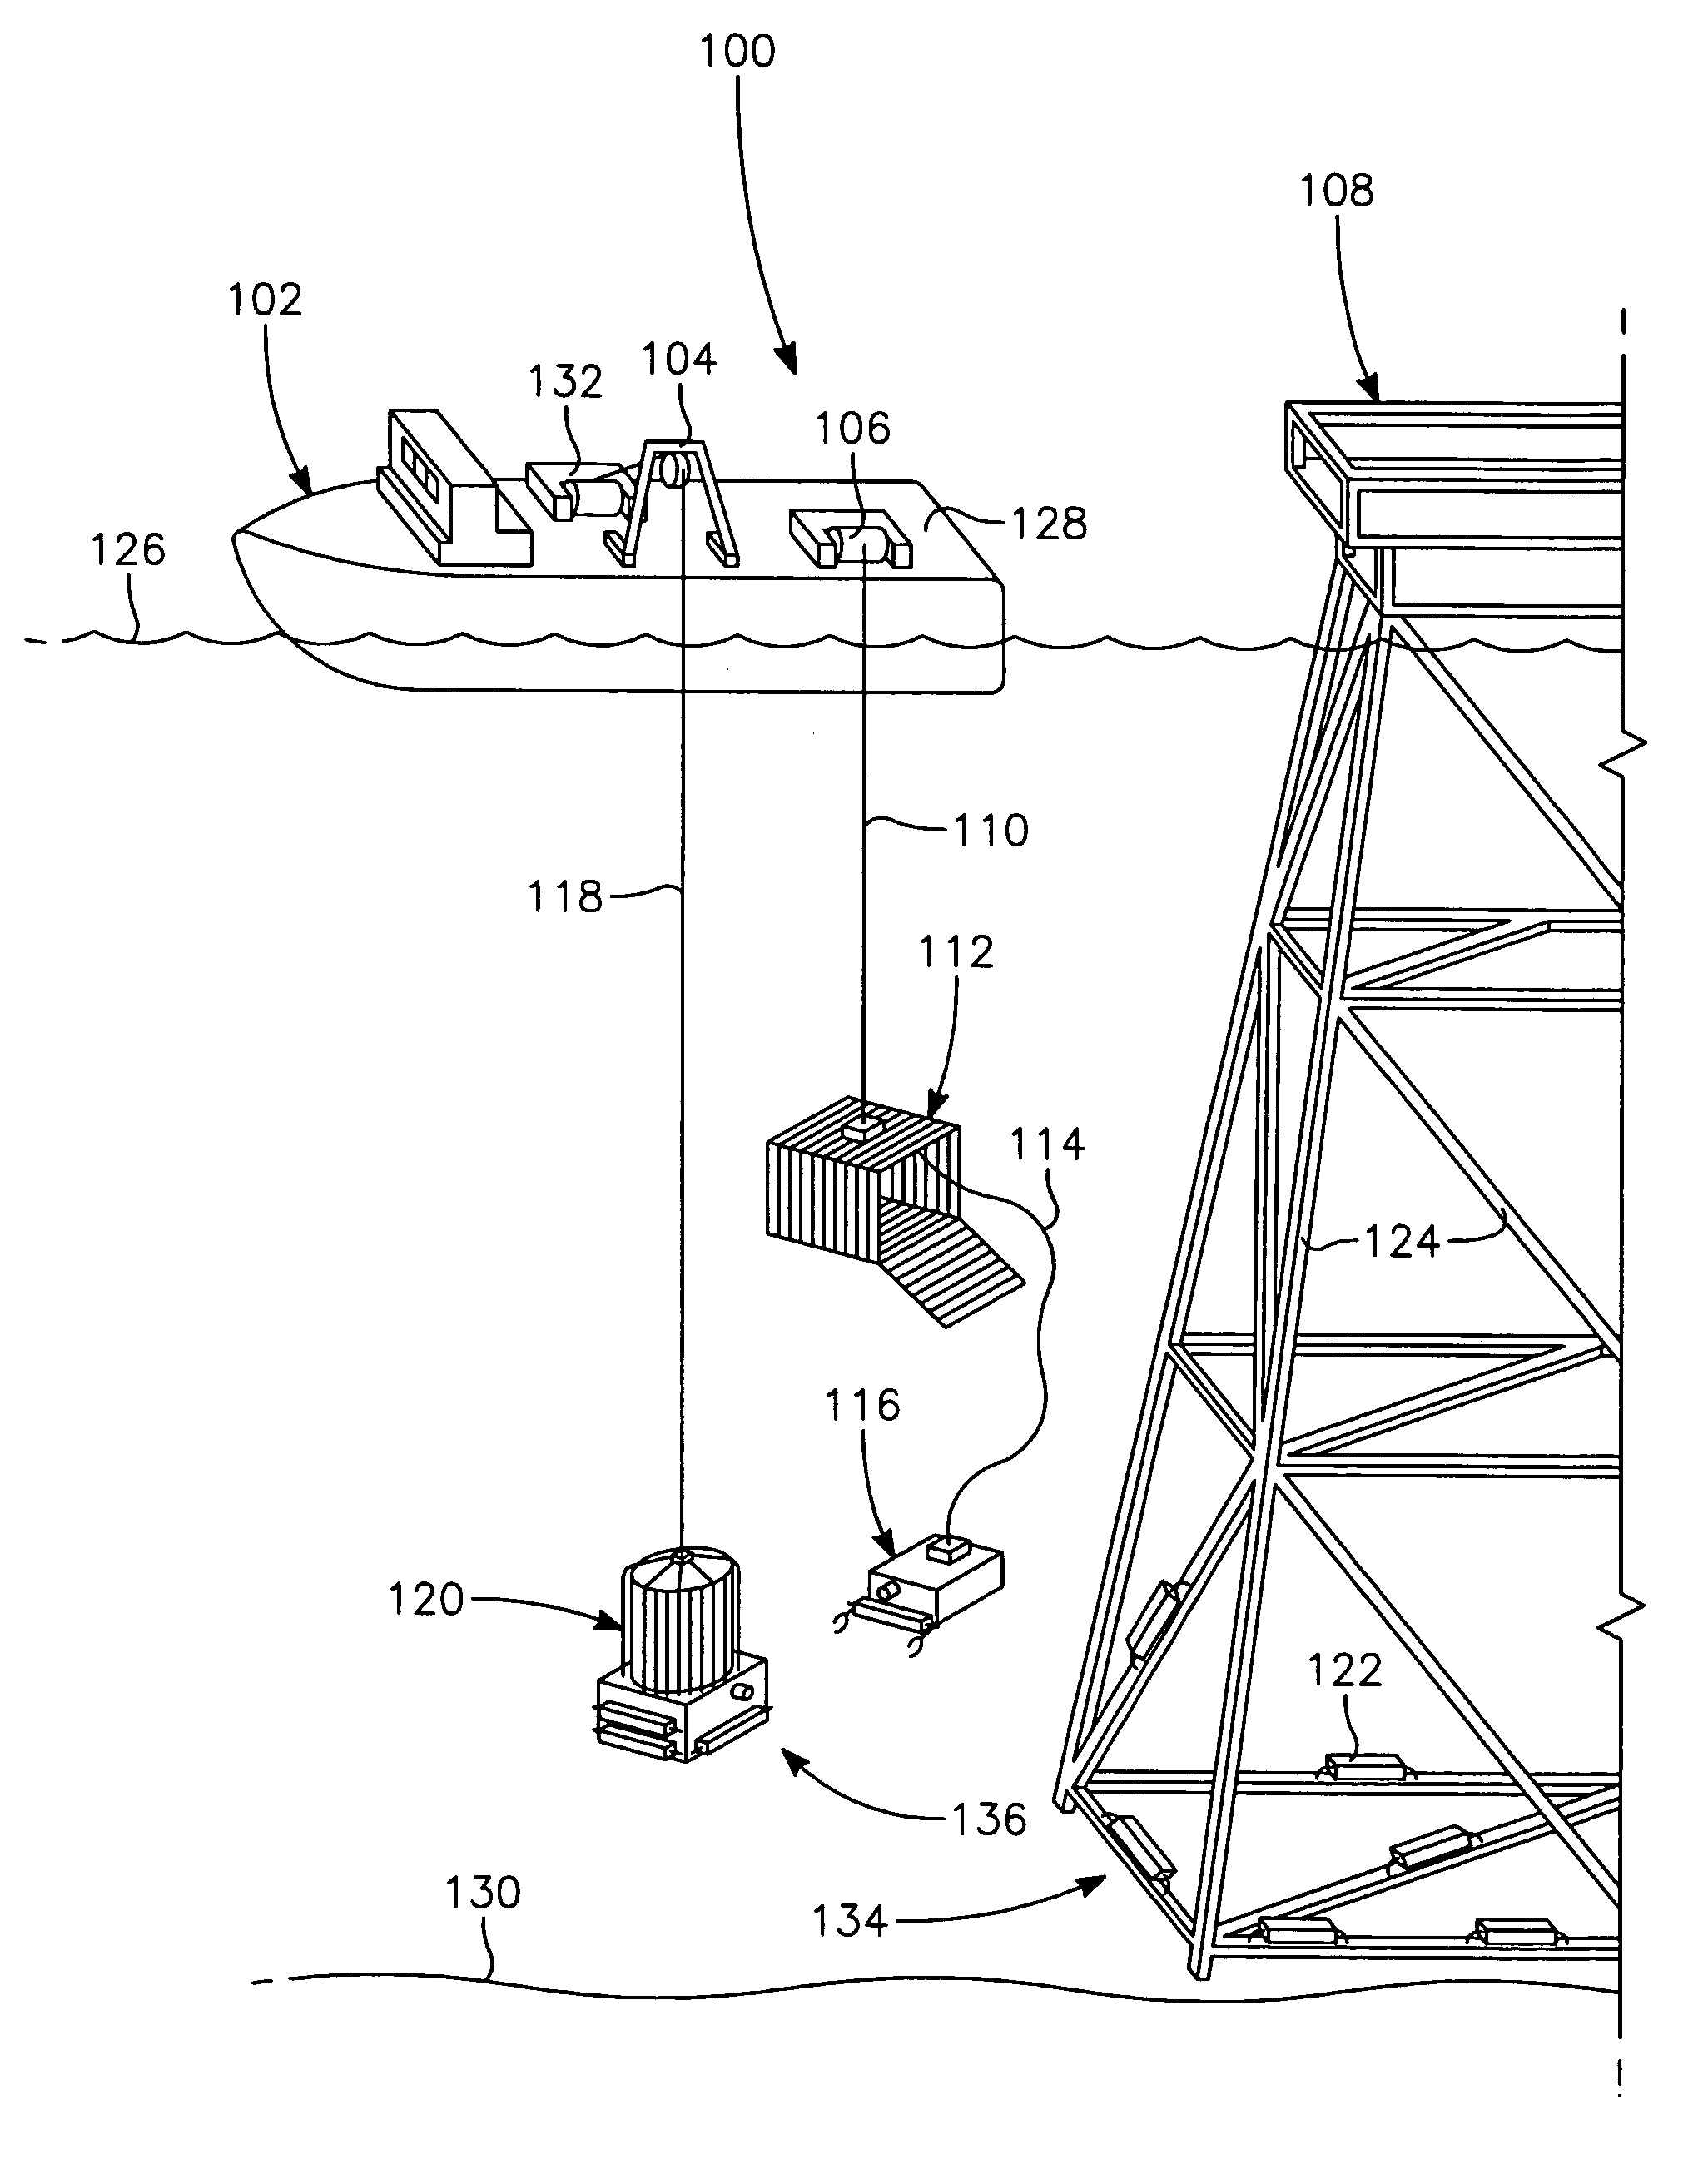 System and method for managing the buoyancy of an underwater vehicle